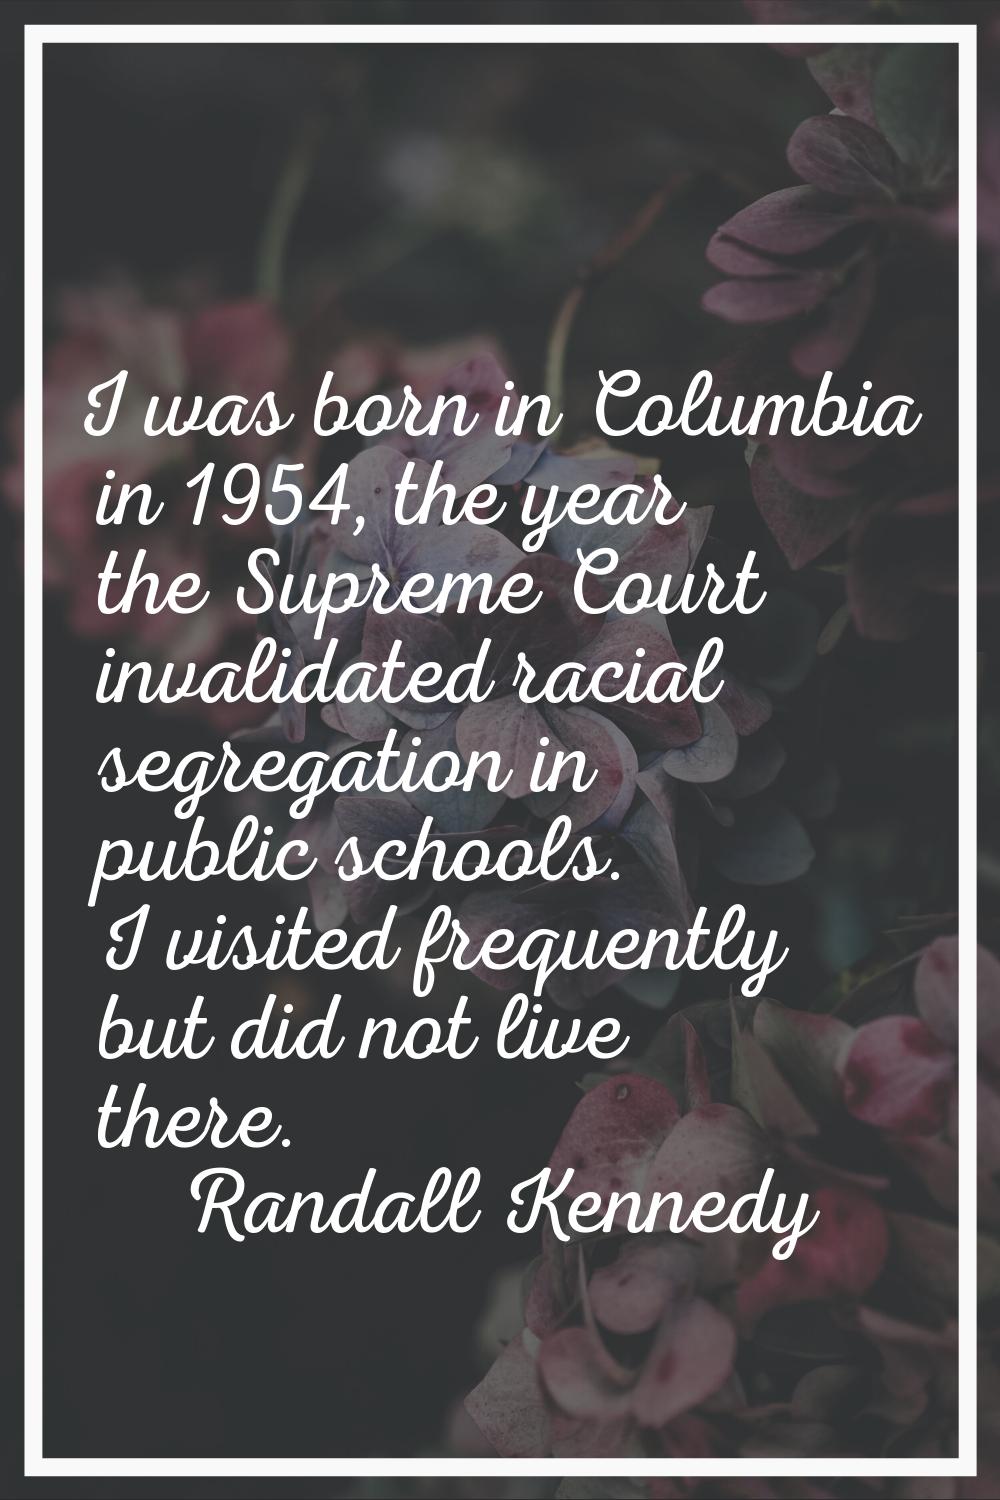 I was born in Columbia in 1954, the year the Supreme Court invalidated racial segregation in public